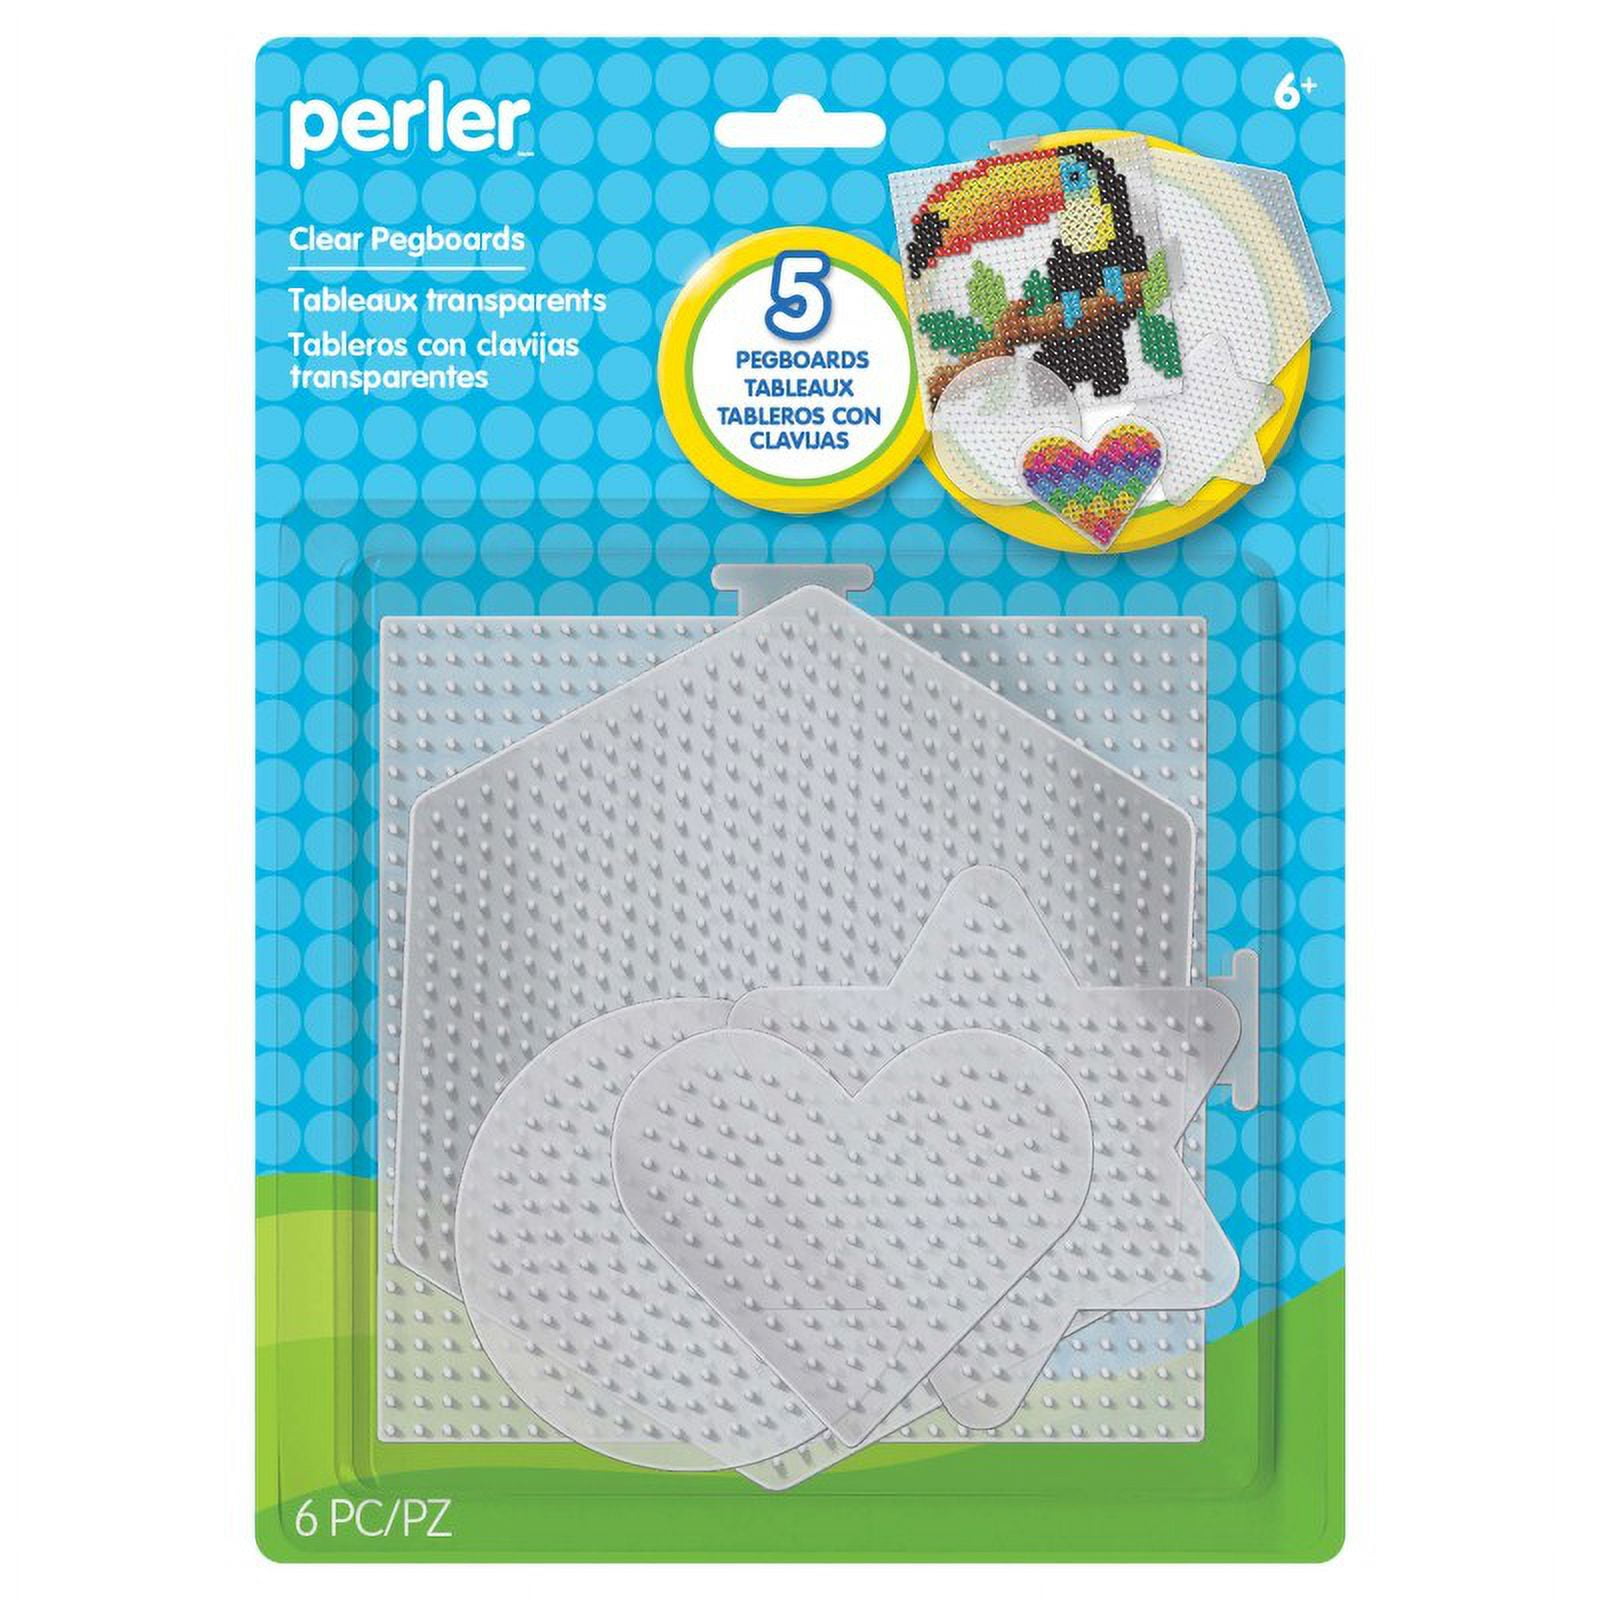 Super Sized Clear Pegboard - Kidsplay Crafts - Art and Craft Supplies